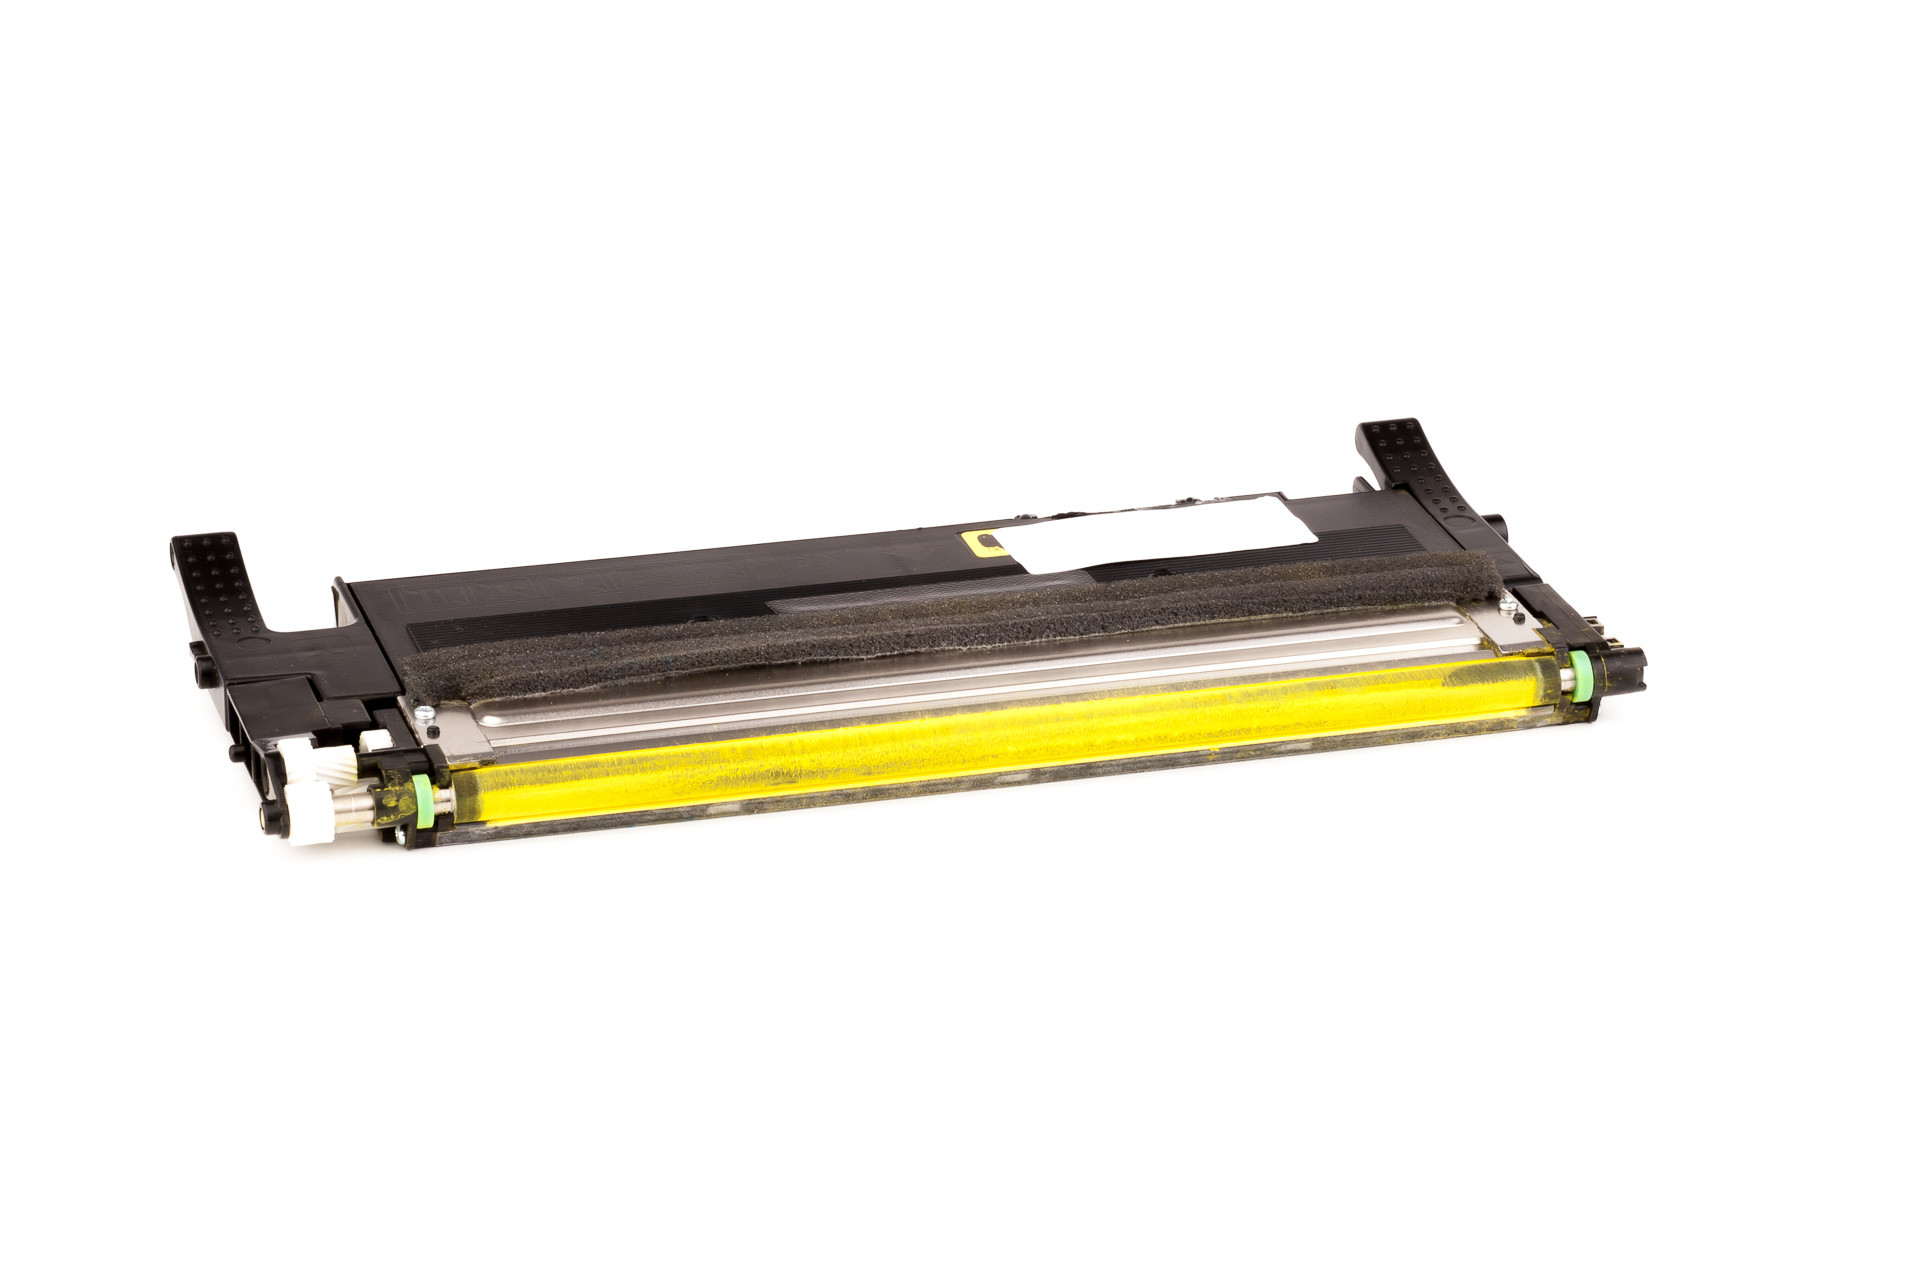 Toner cartridge (alternative) compatible with Samsung - CLTY406SELS/CLT-Y 406 S/ELS - Y406 - CLP 360 yellow